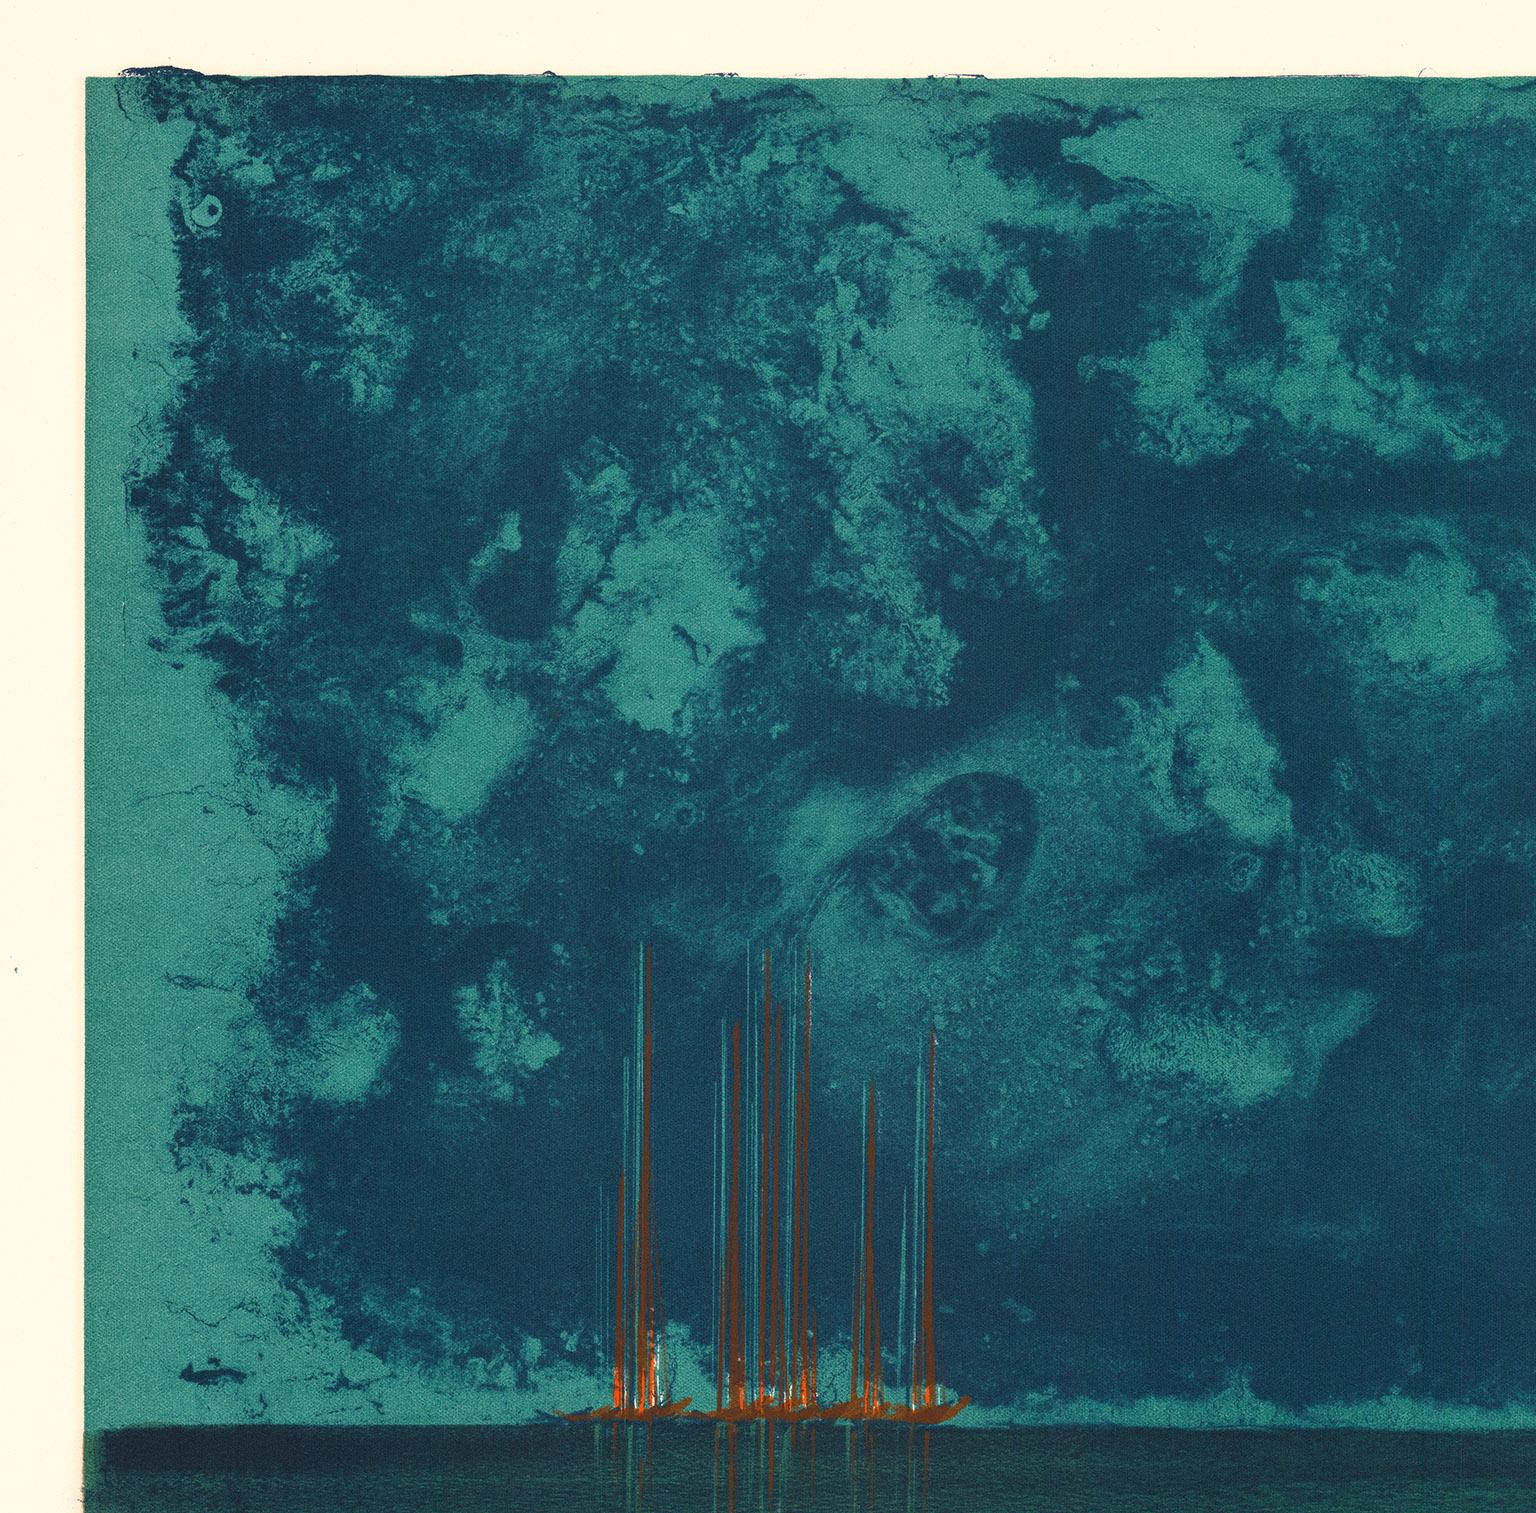 Richard Florsheim created this color lithograph entitled “Thunderheads” in 1972 in an edition of 50 pieces. Published by Associated American Artists and printed by Mourlot Press, Paris, this impression is signed and inscribed “21/50.” It is in good